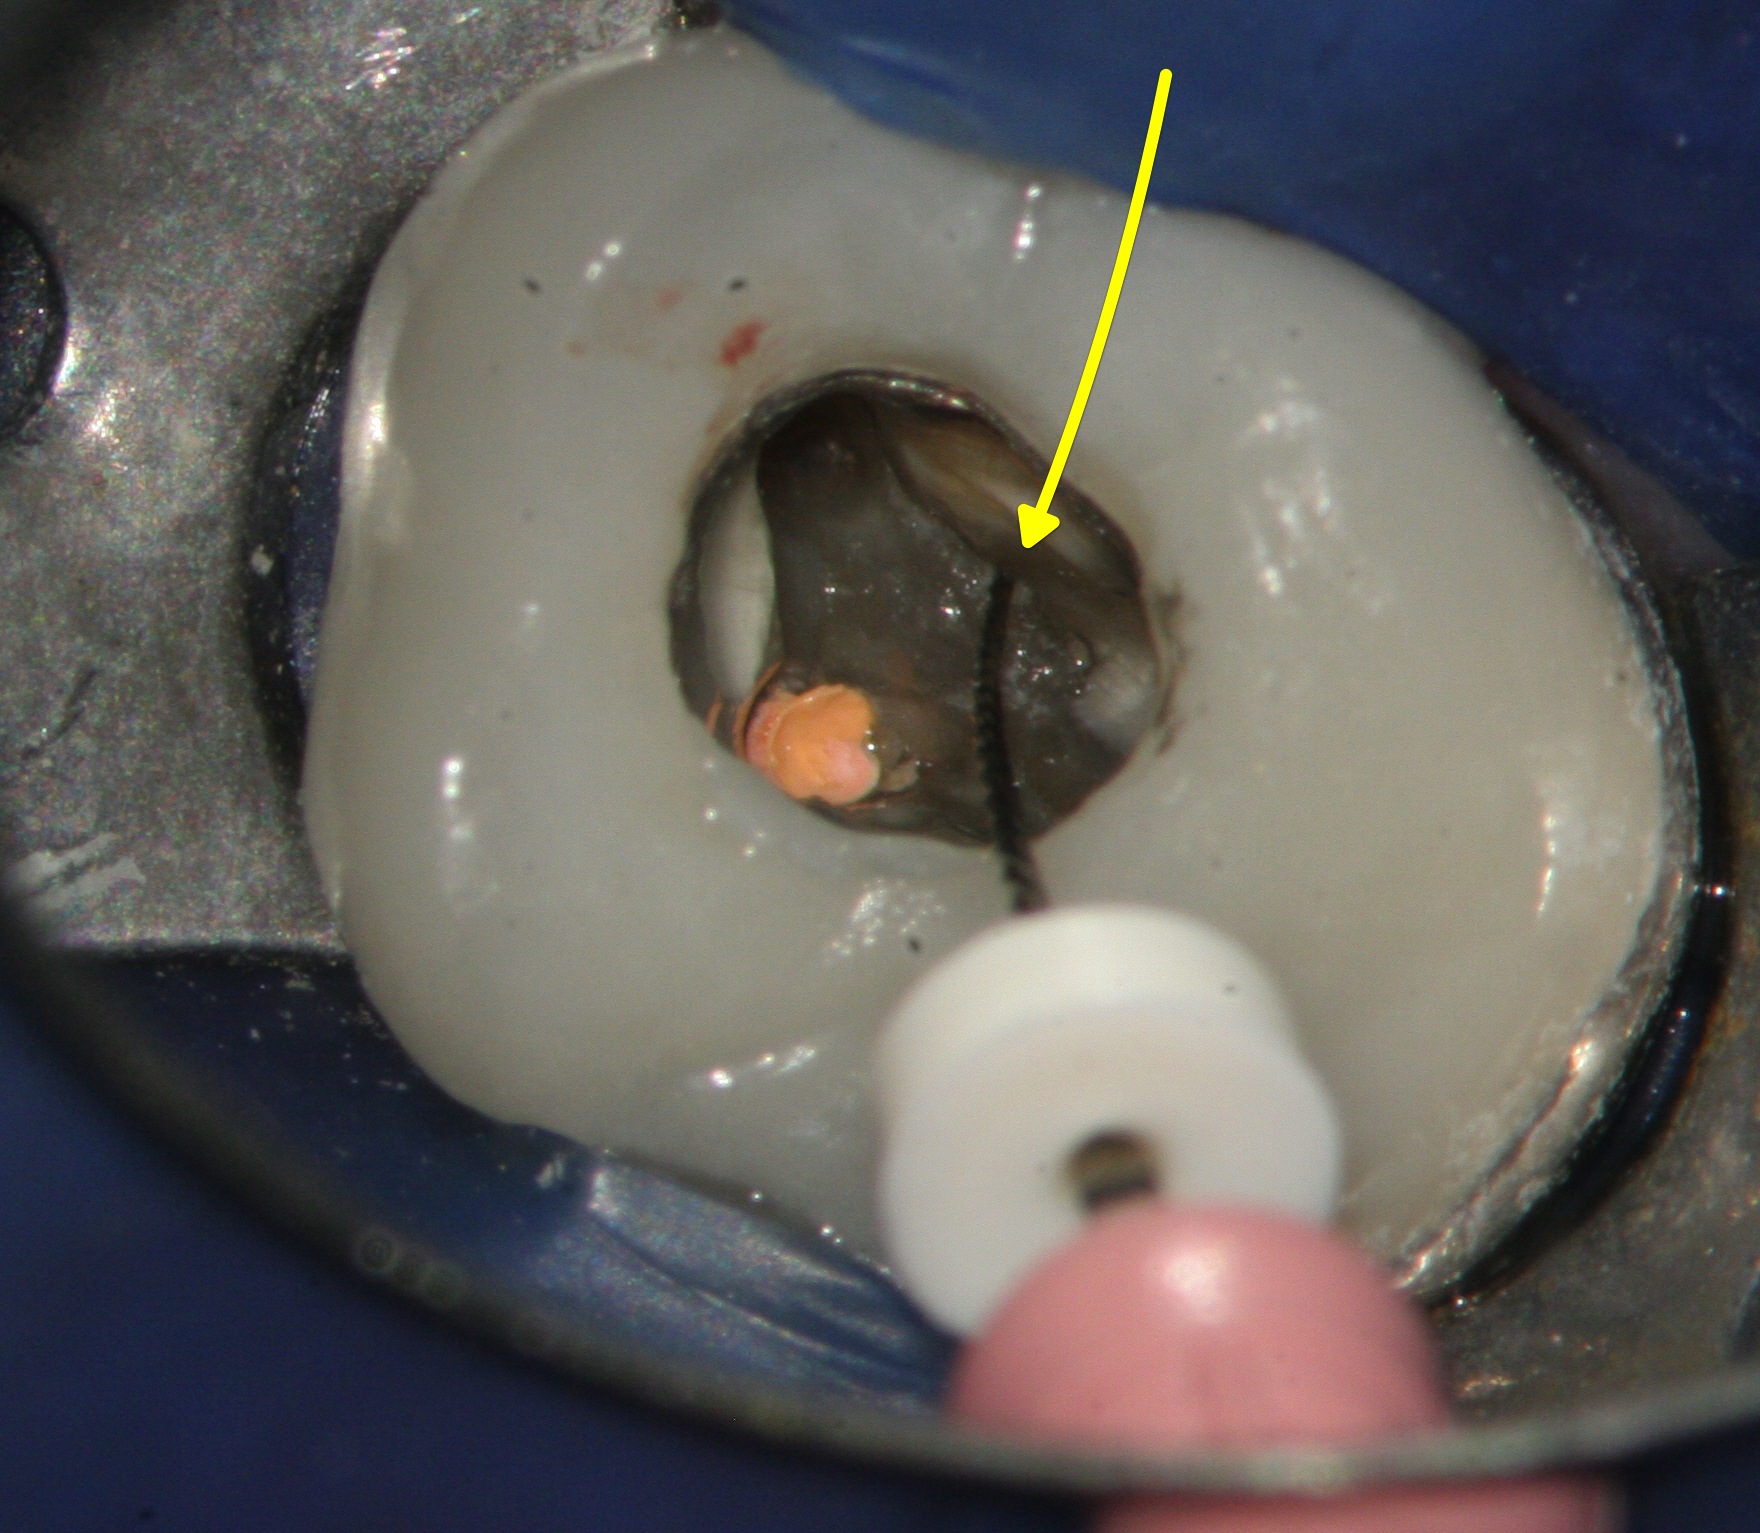 1325959994_4. Smallest endodontic file in previously missed MB2 canal